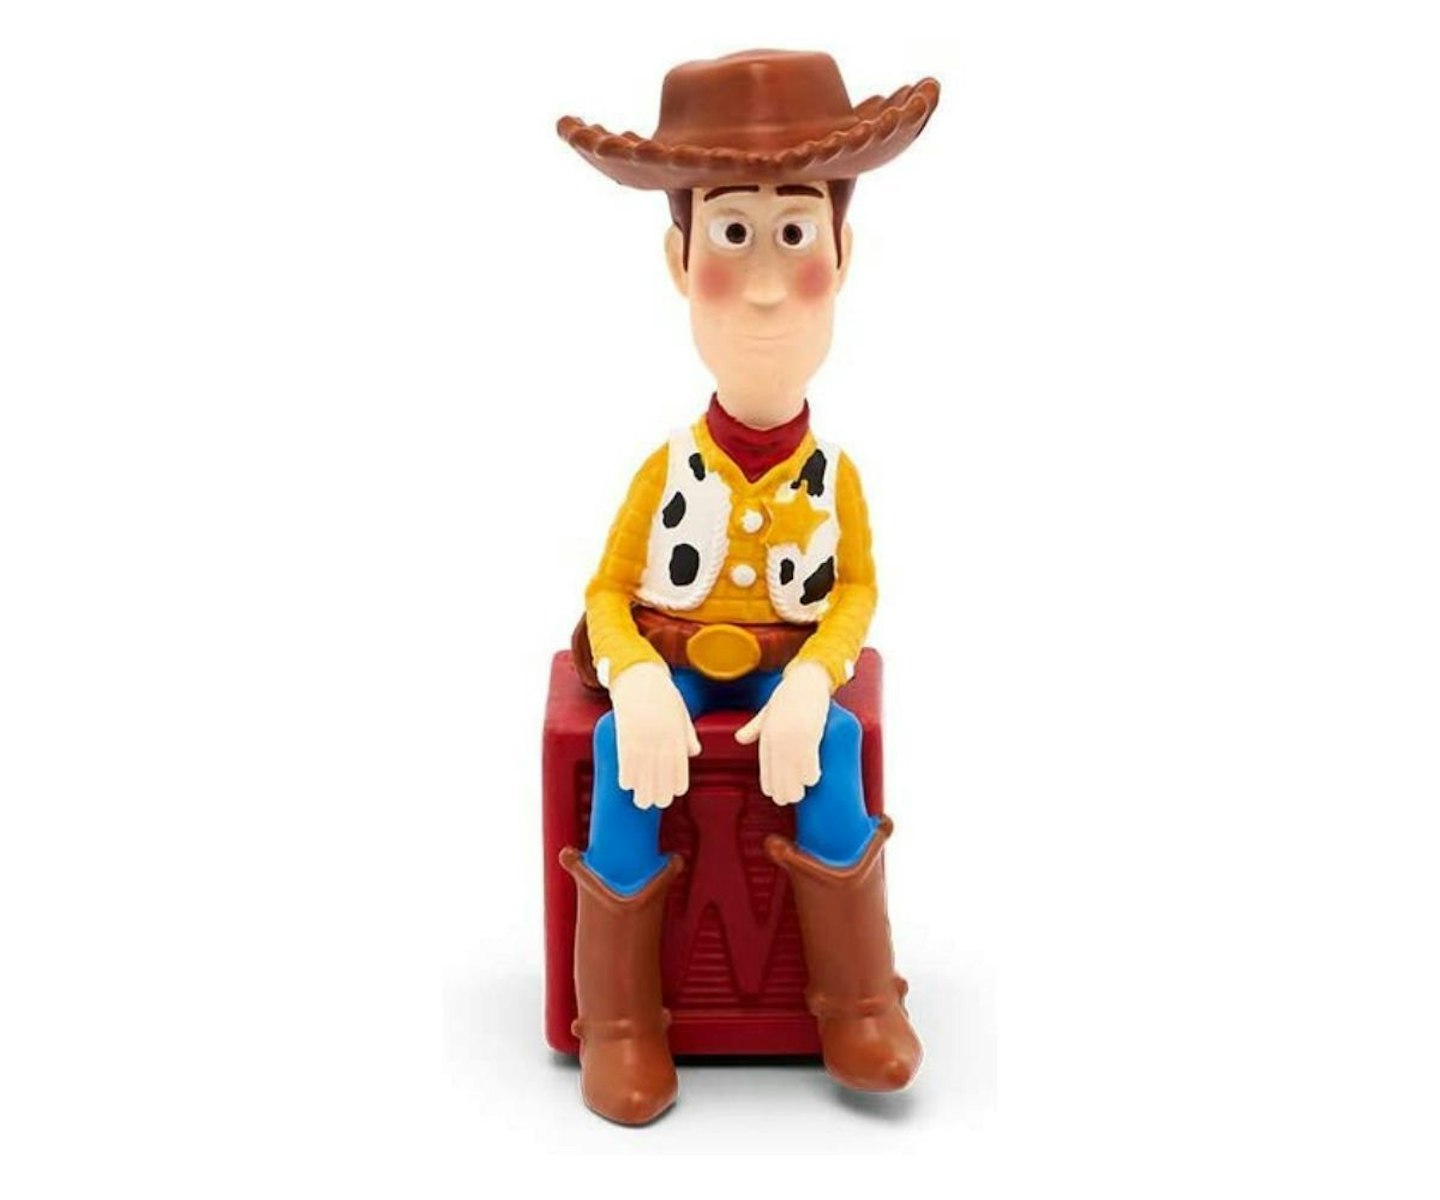 toy-story-toys